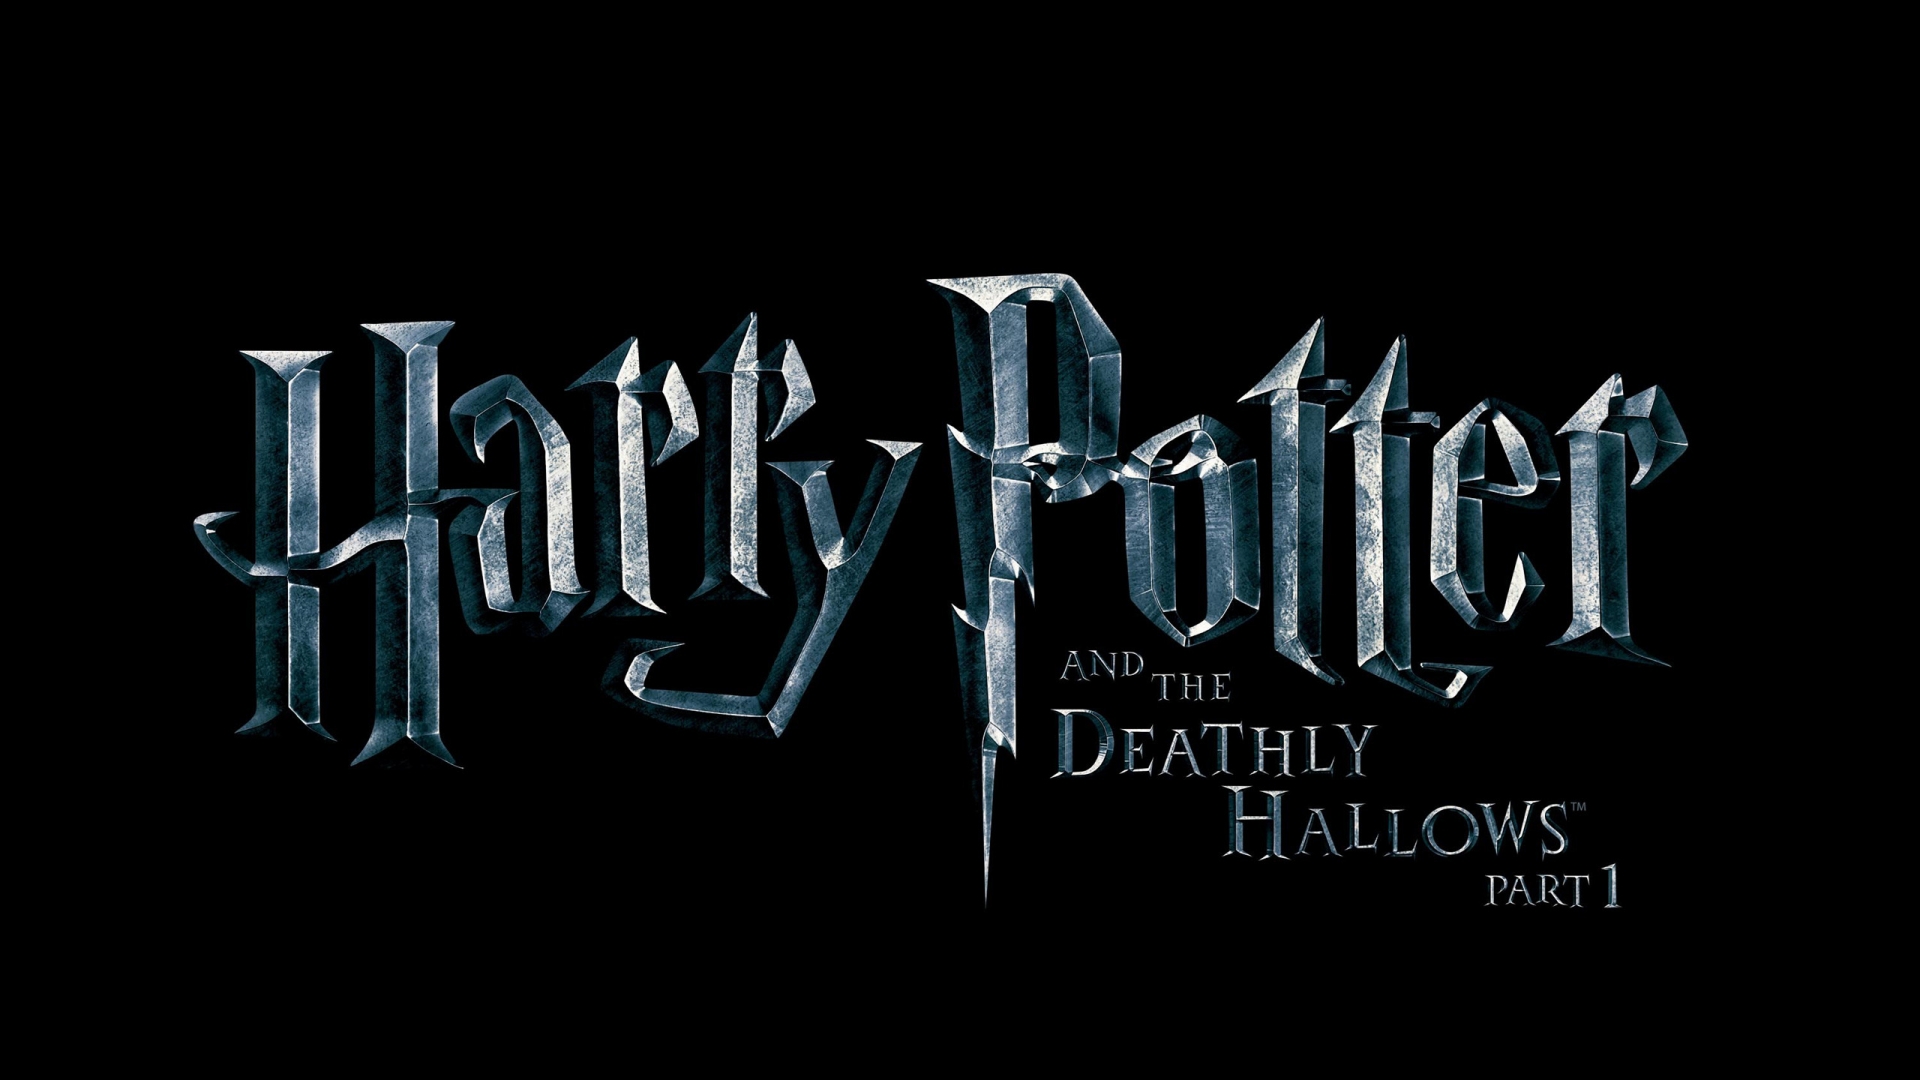 Harry Potter and the Deathly Hallows for 1920 x 1080 HDTV 1080p resolution